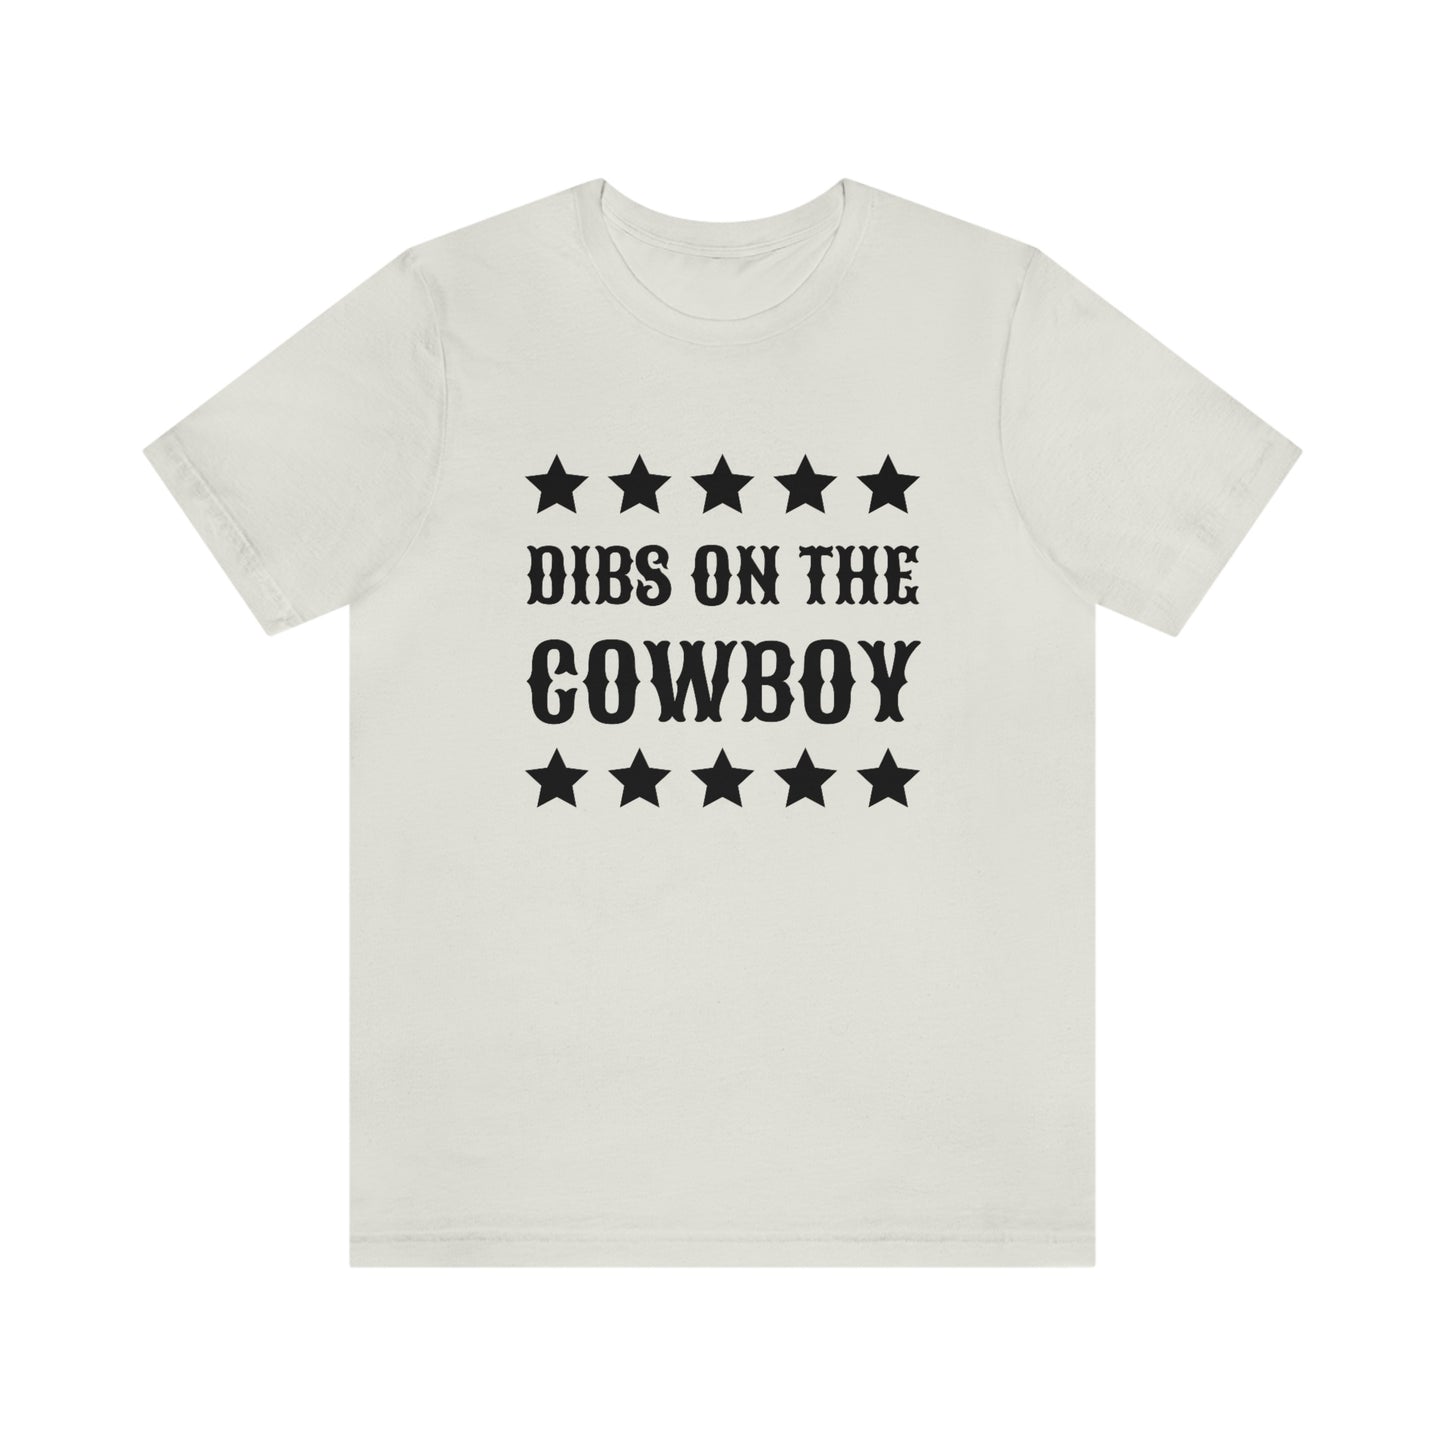 "Dibs on the Cowboy" Unisex Jersey Short Sleeve Tee